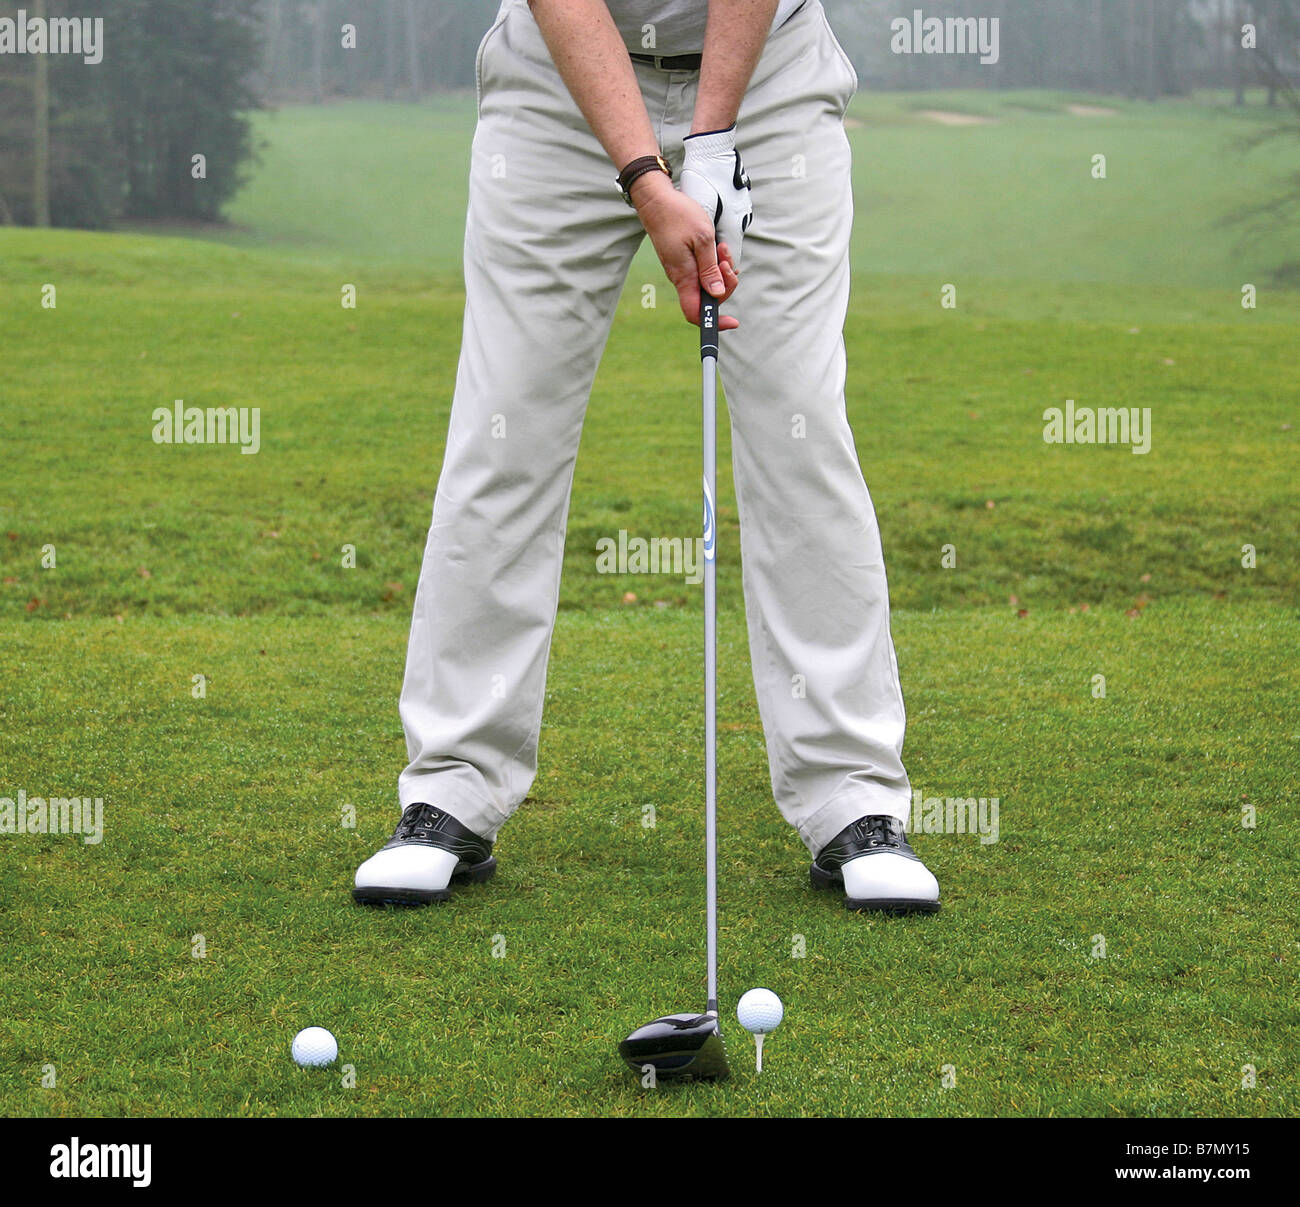 Golfer at address position to golf ball Stock Photo